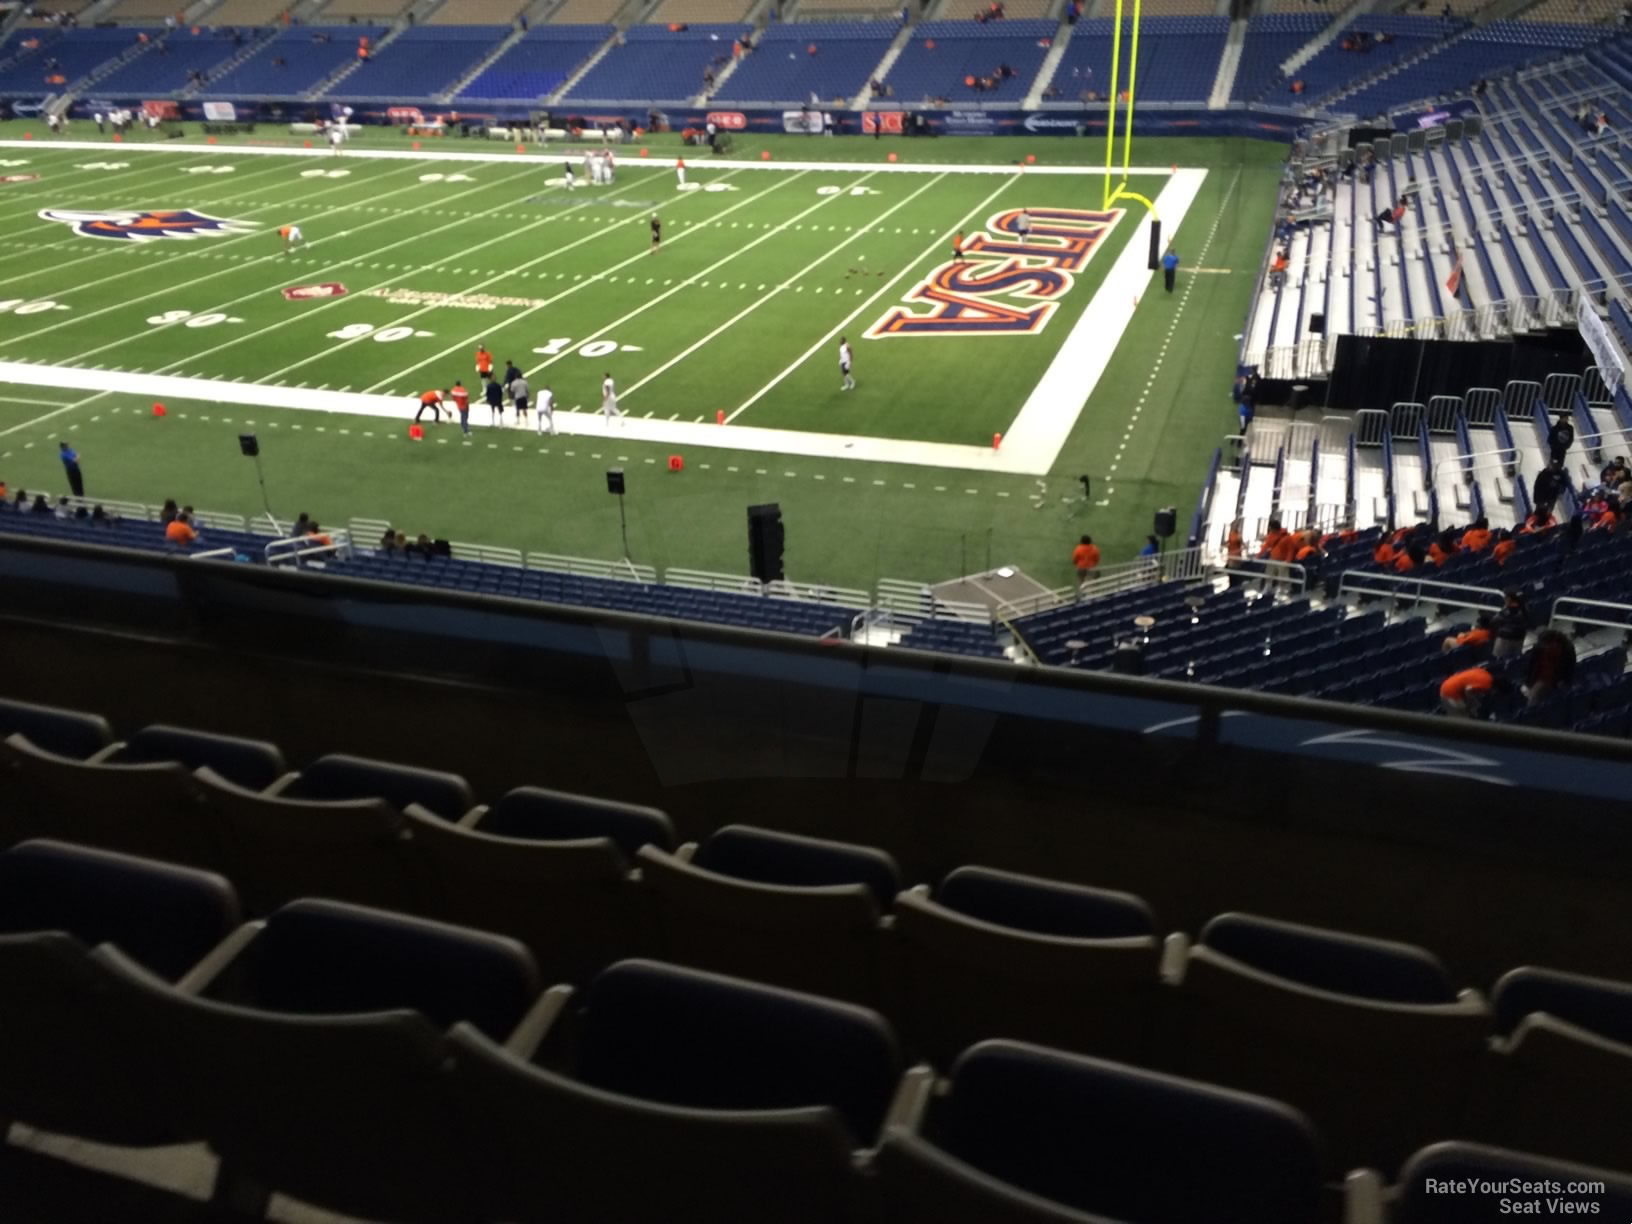 section 229, row 5 seat view  for football - alamodome